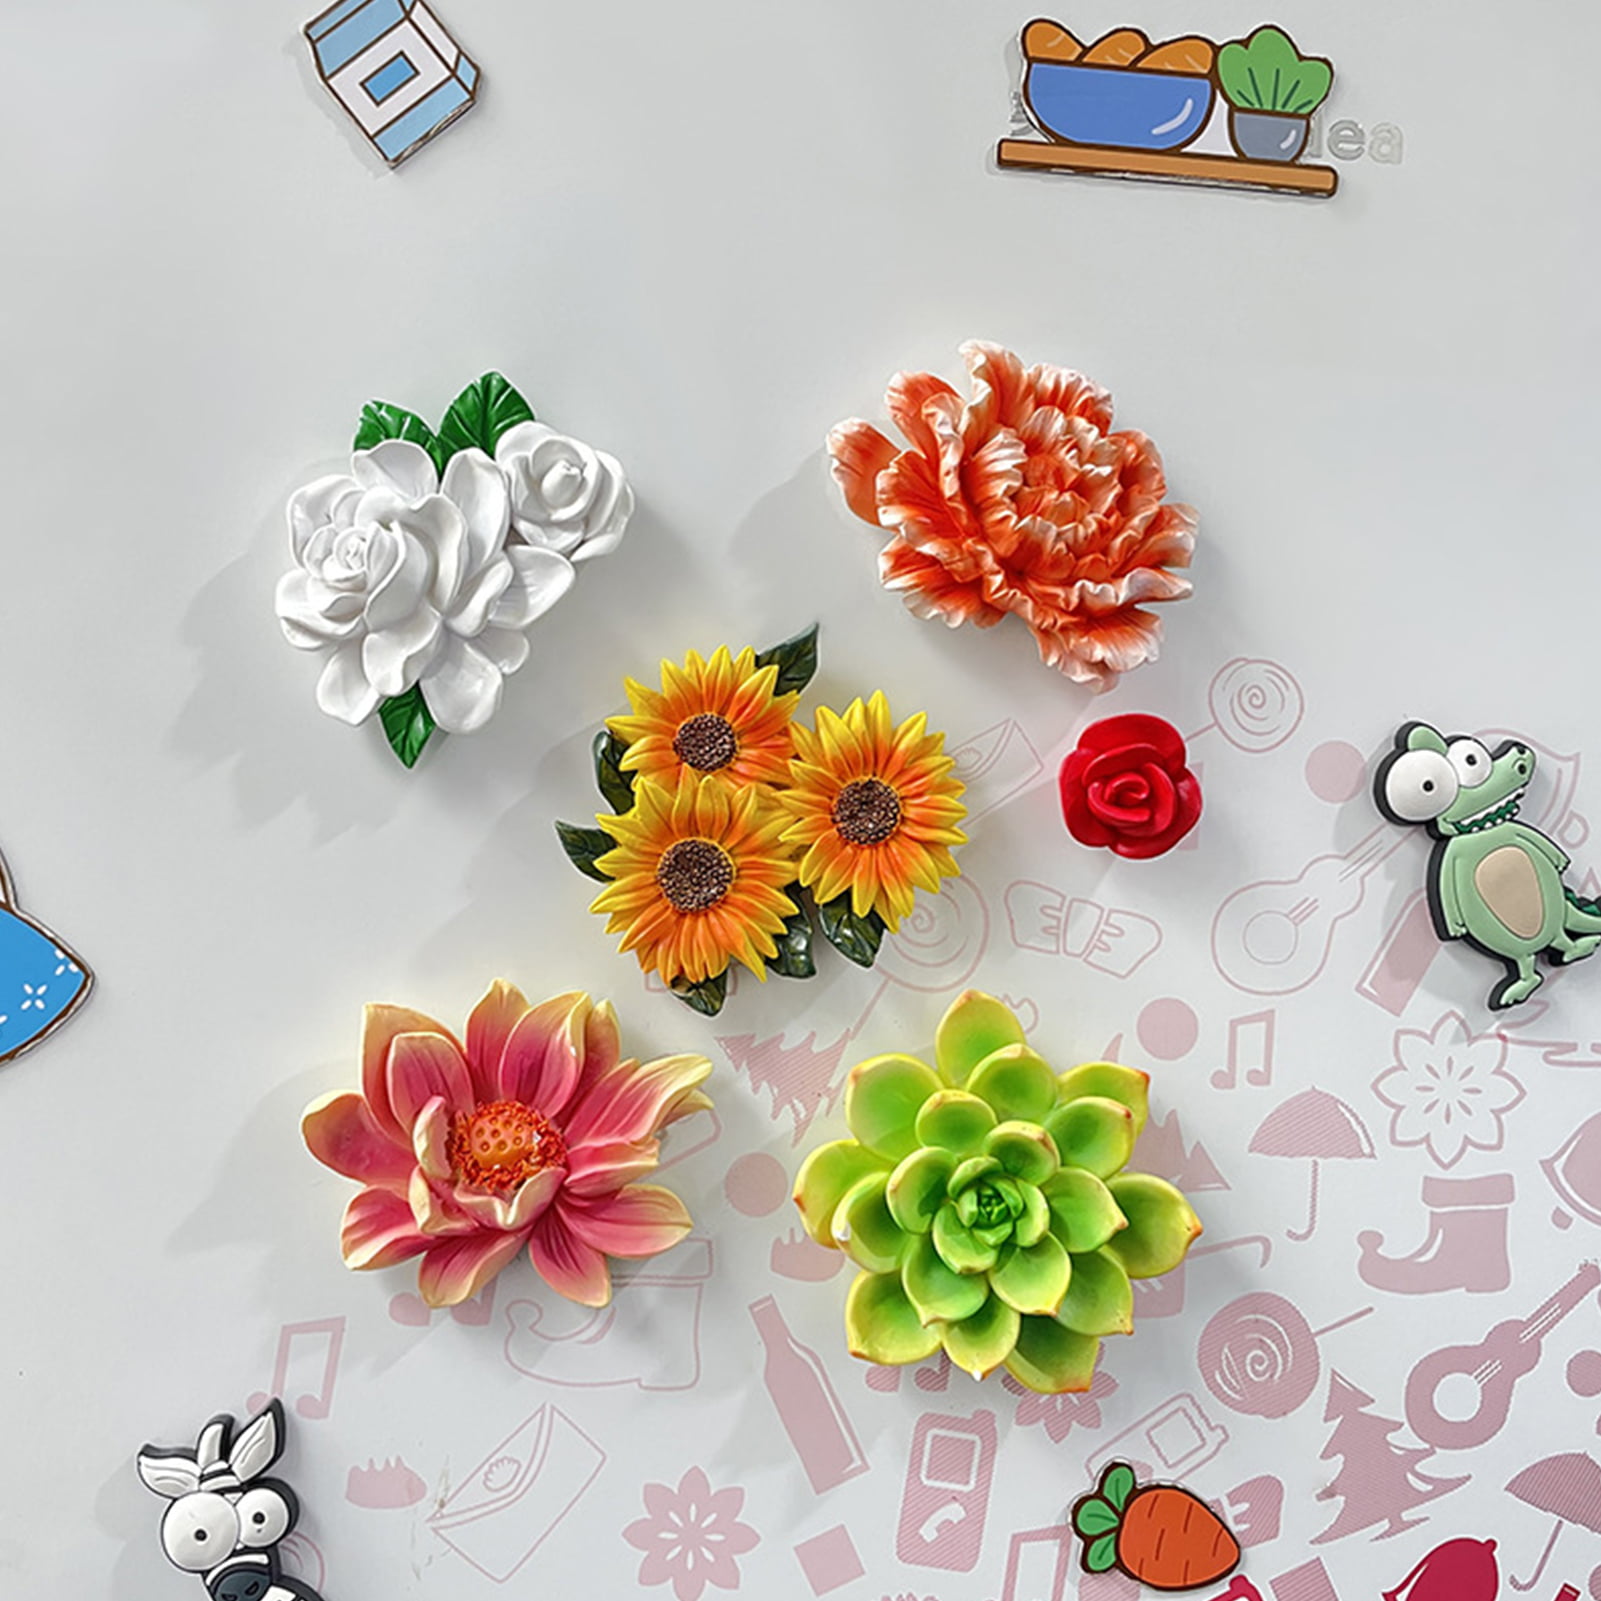 Details about   3D  Refrigerator Wall Kitchen Removable Sticker Magnet Flowers Hawaiian pattern 